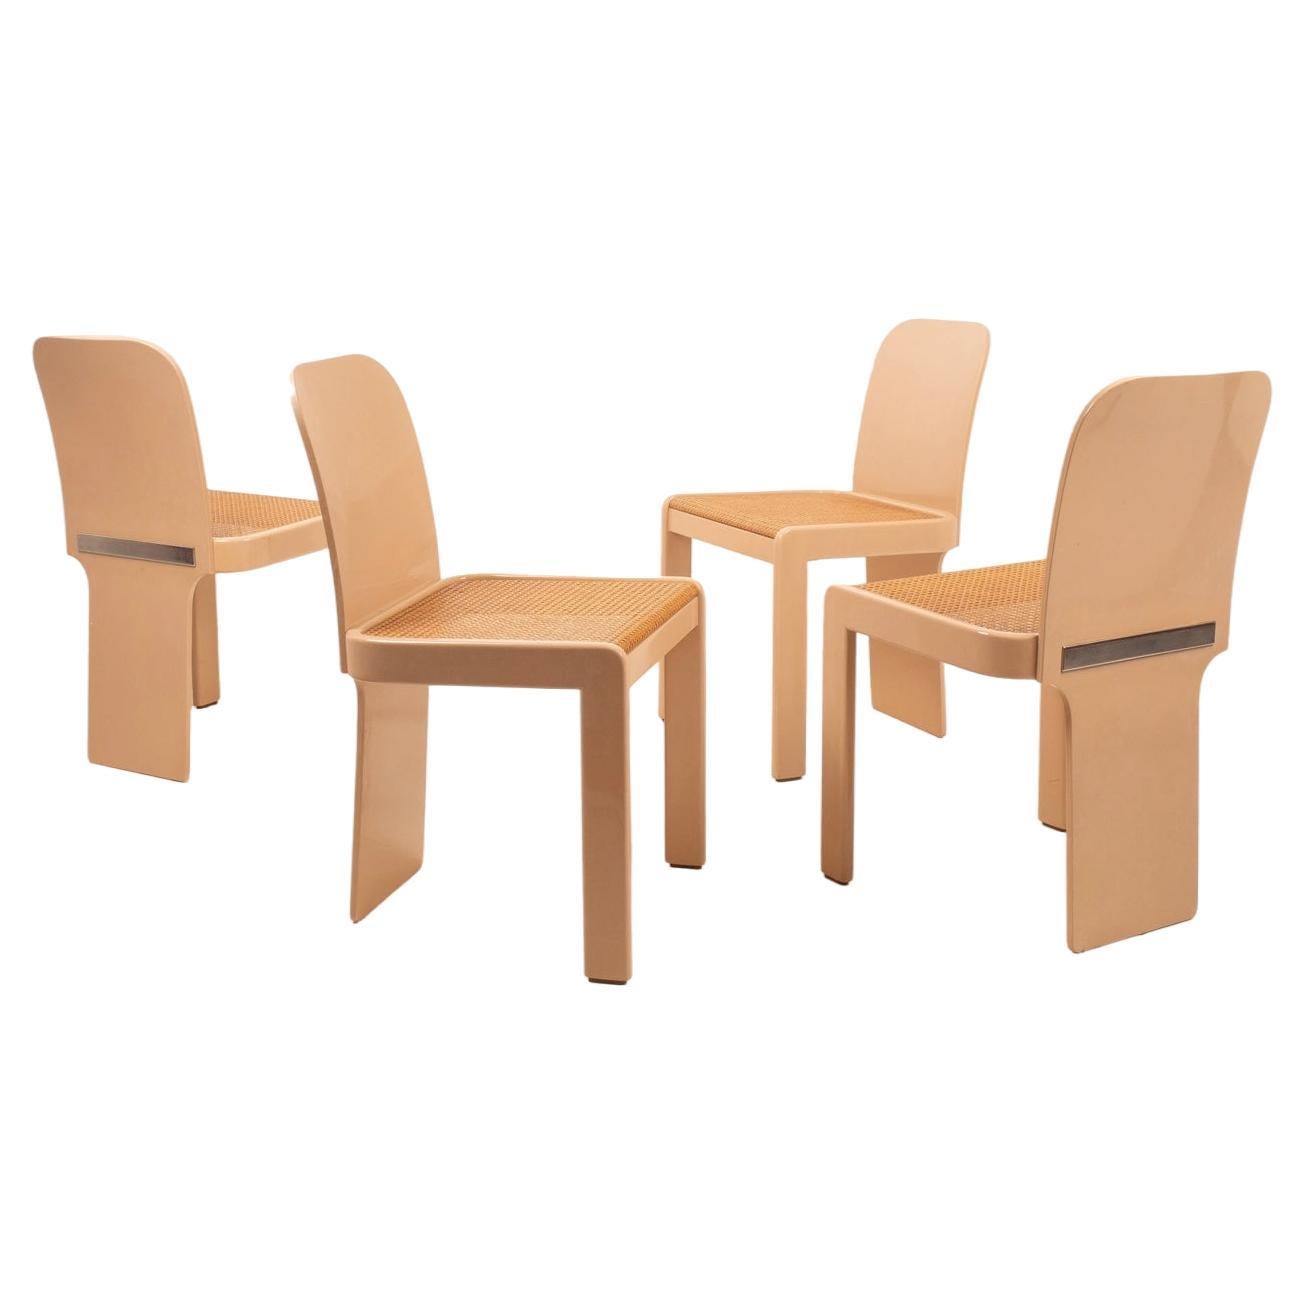 Set of 4 Chairs by Pierluigi Molinari for Pozzi For Sale